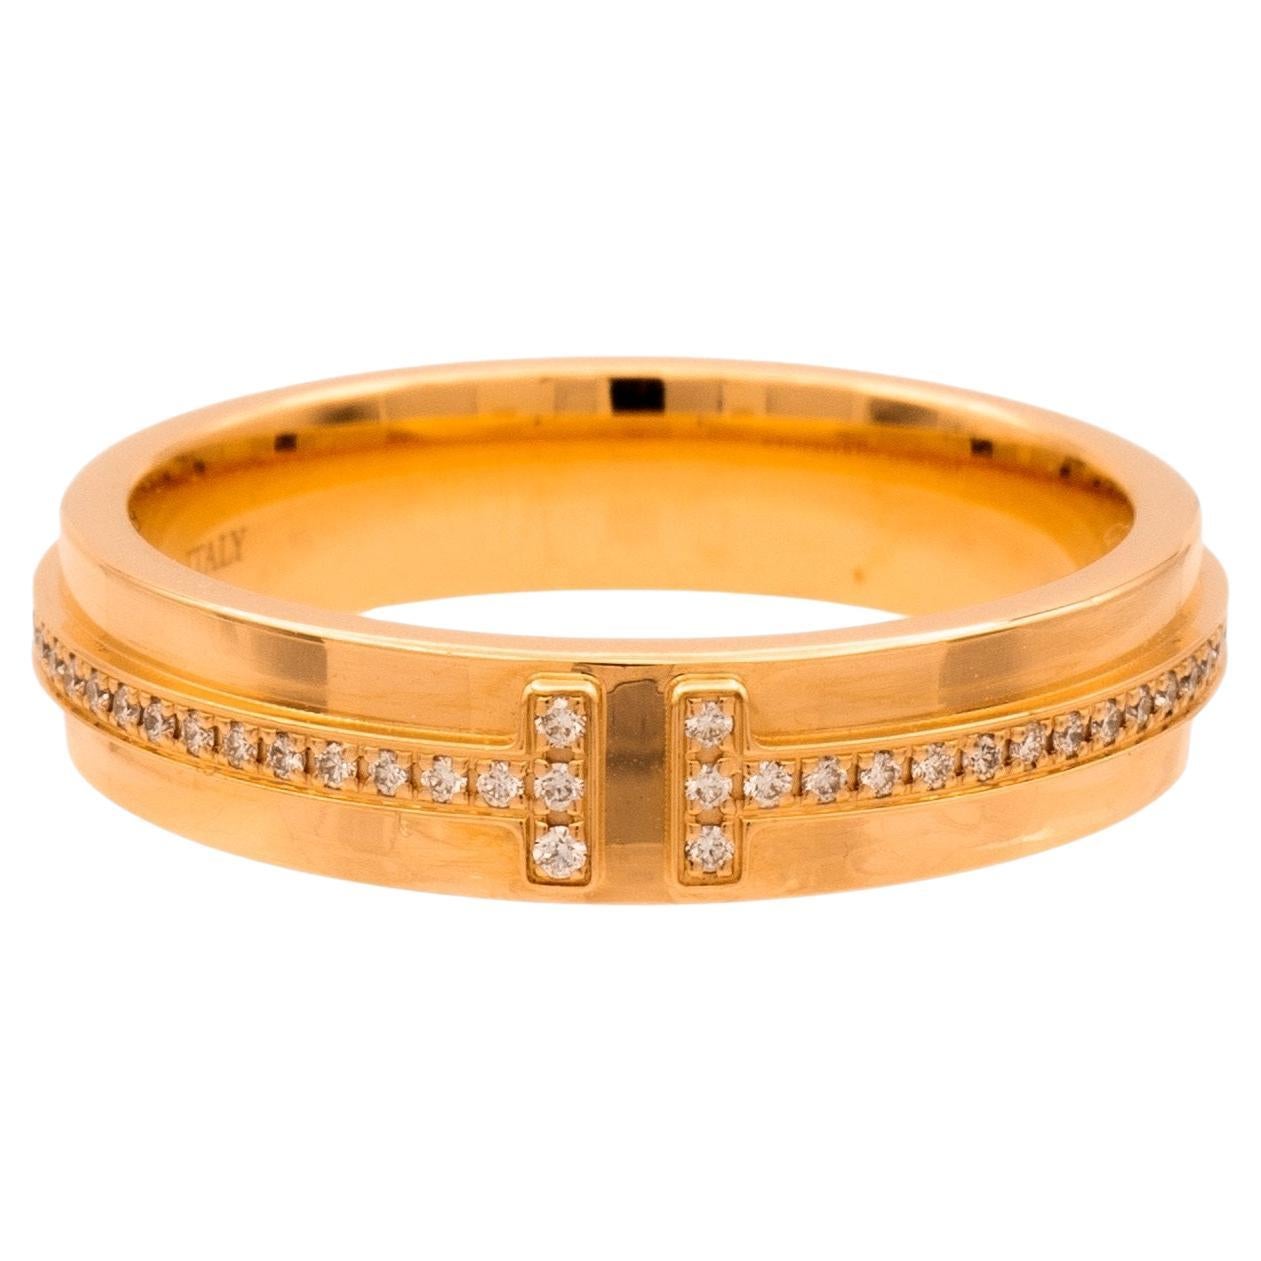 Tiffany & Co. T Narrow 18K Rose Gold 4.5 mm Wide .13 ct Diamond Band Ring Size 7 For Sale